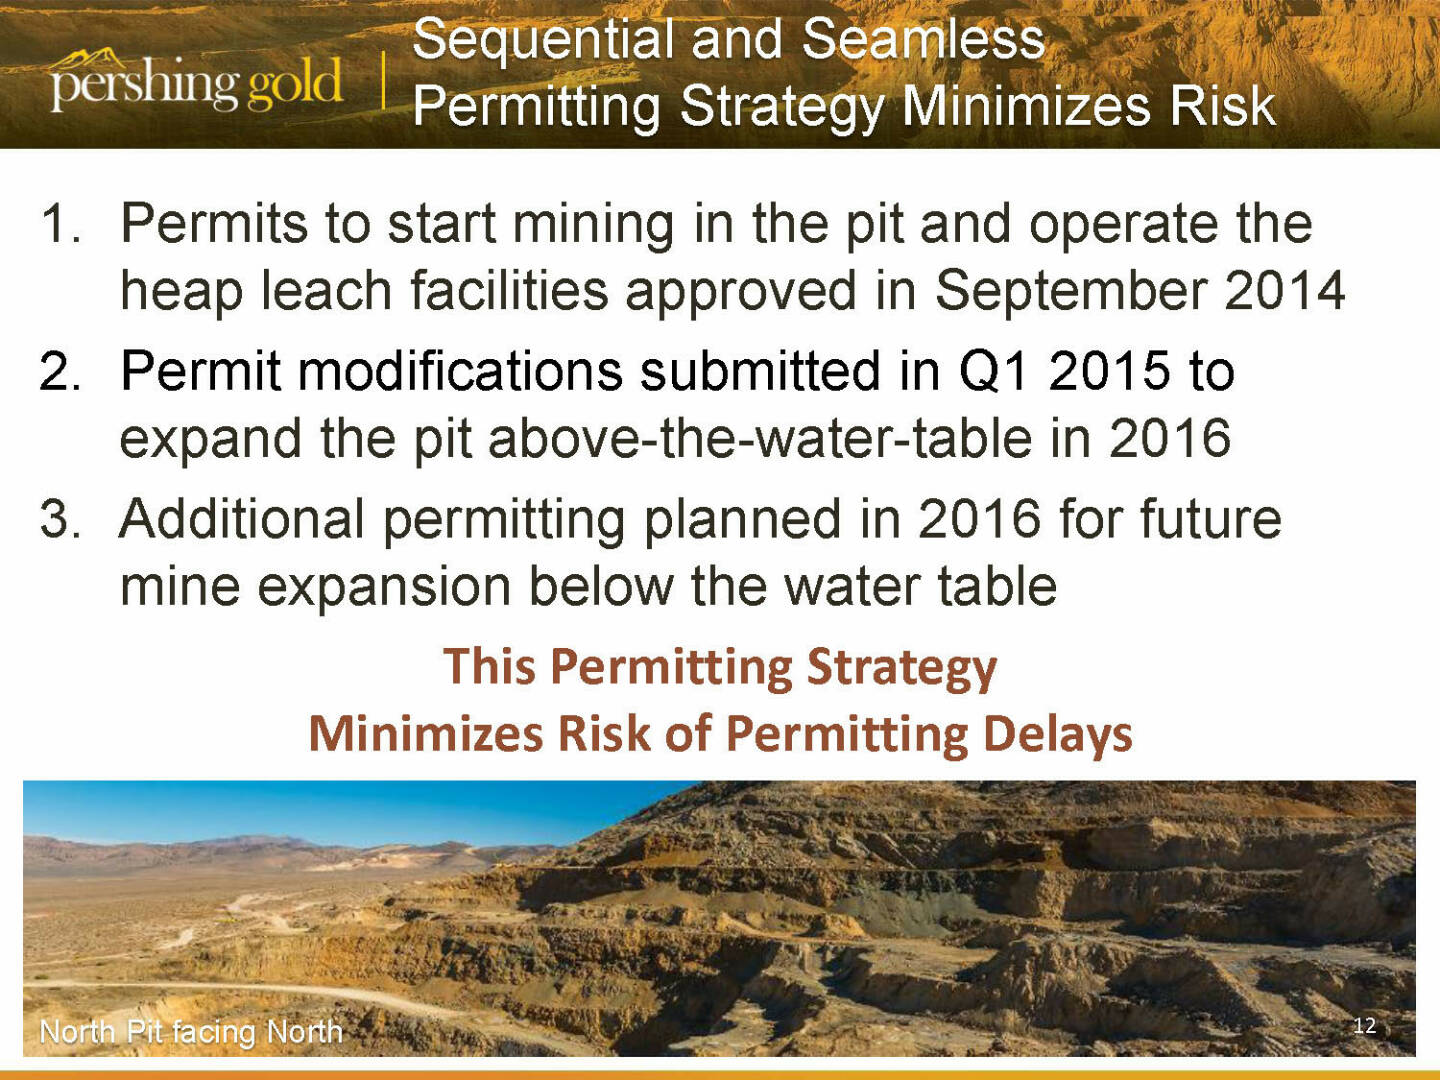 Sequential and seamless permitting strategy minimizes risk - Pershing Gold